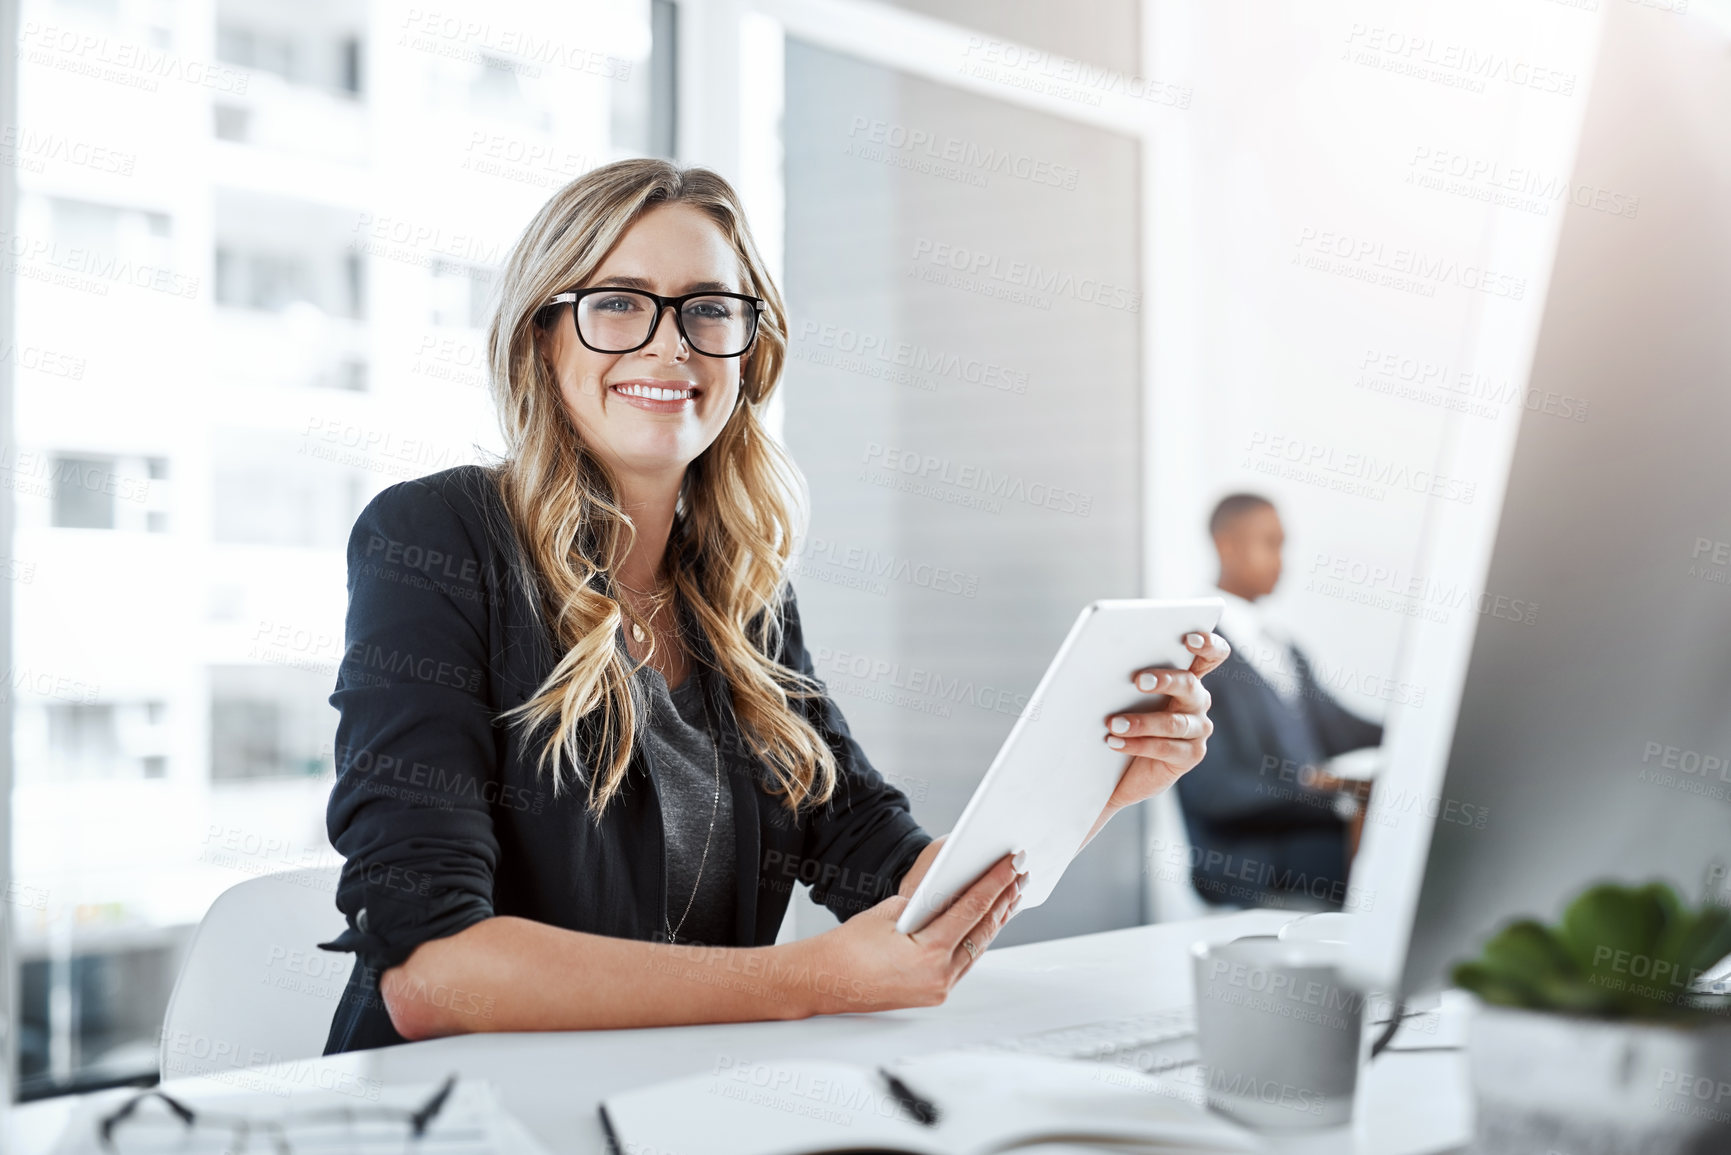 Buy stock photo Portrait of a young businesswoman using a digital tablet at her desk in a modern office